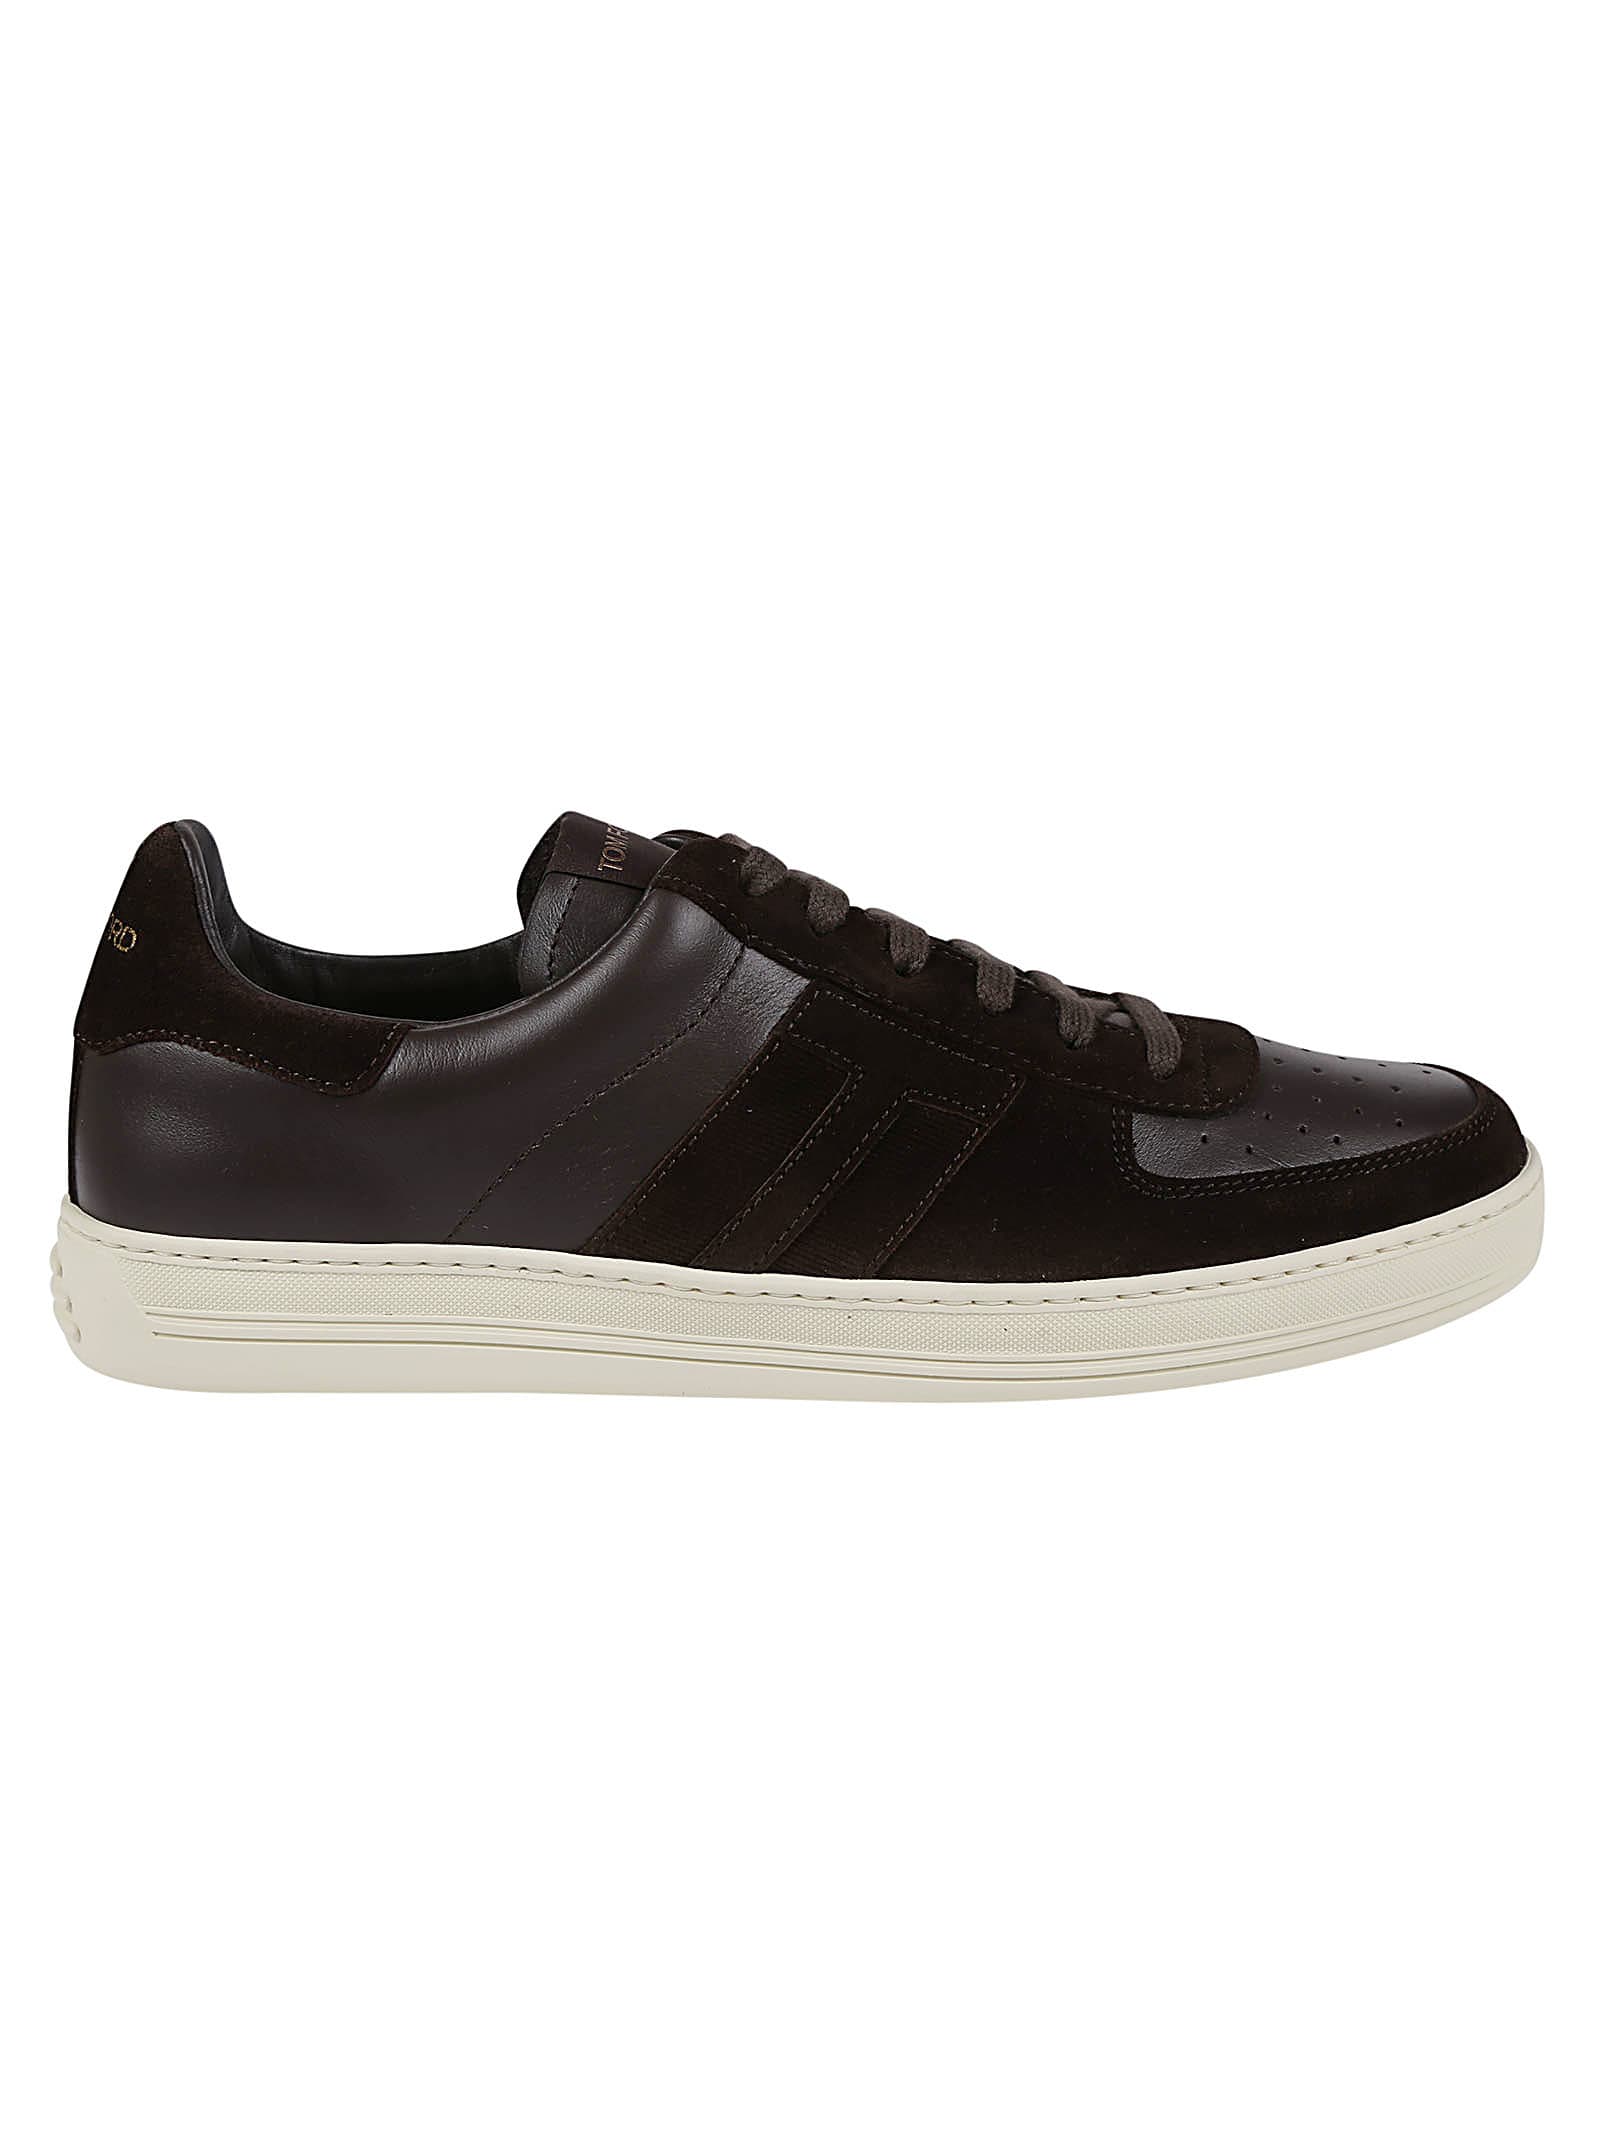 TOM FORD RADCLIFFE LOW TOP trainers